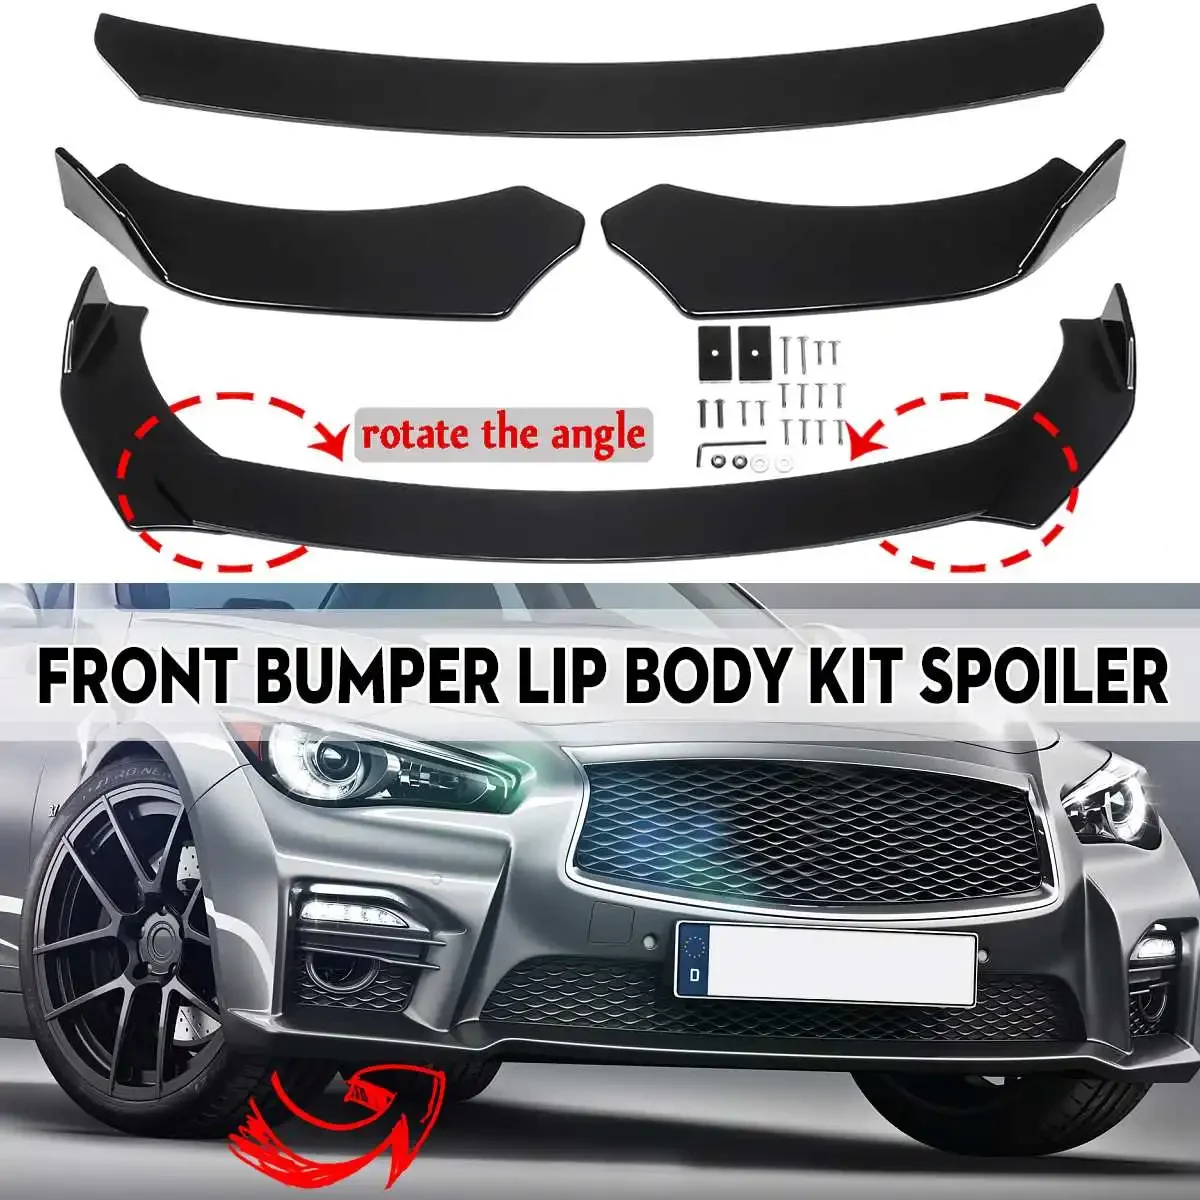 Universal 3x Car Front Bumper Splitter Lip For BMW For Benz For Audi For VW For Subaru Spoiler Diffuser Guard Cover Body Kit 1